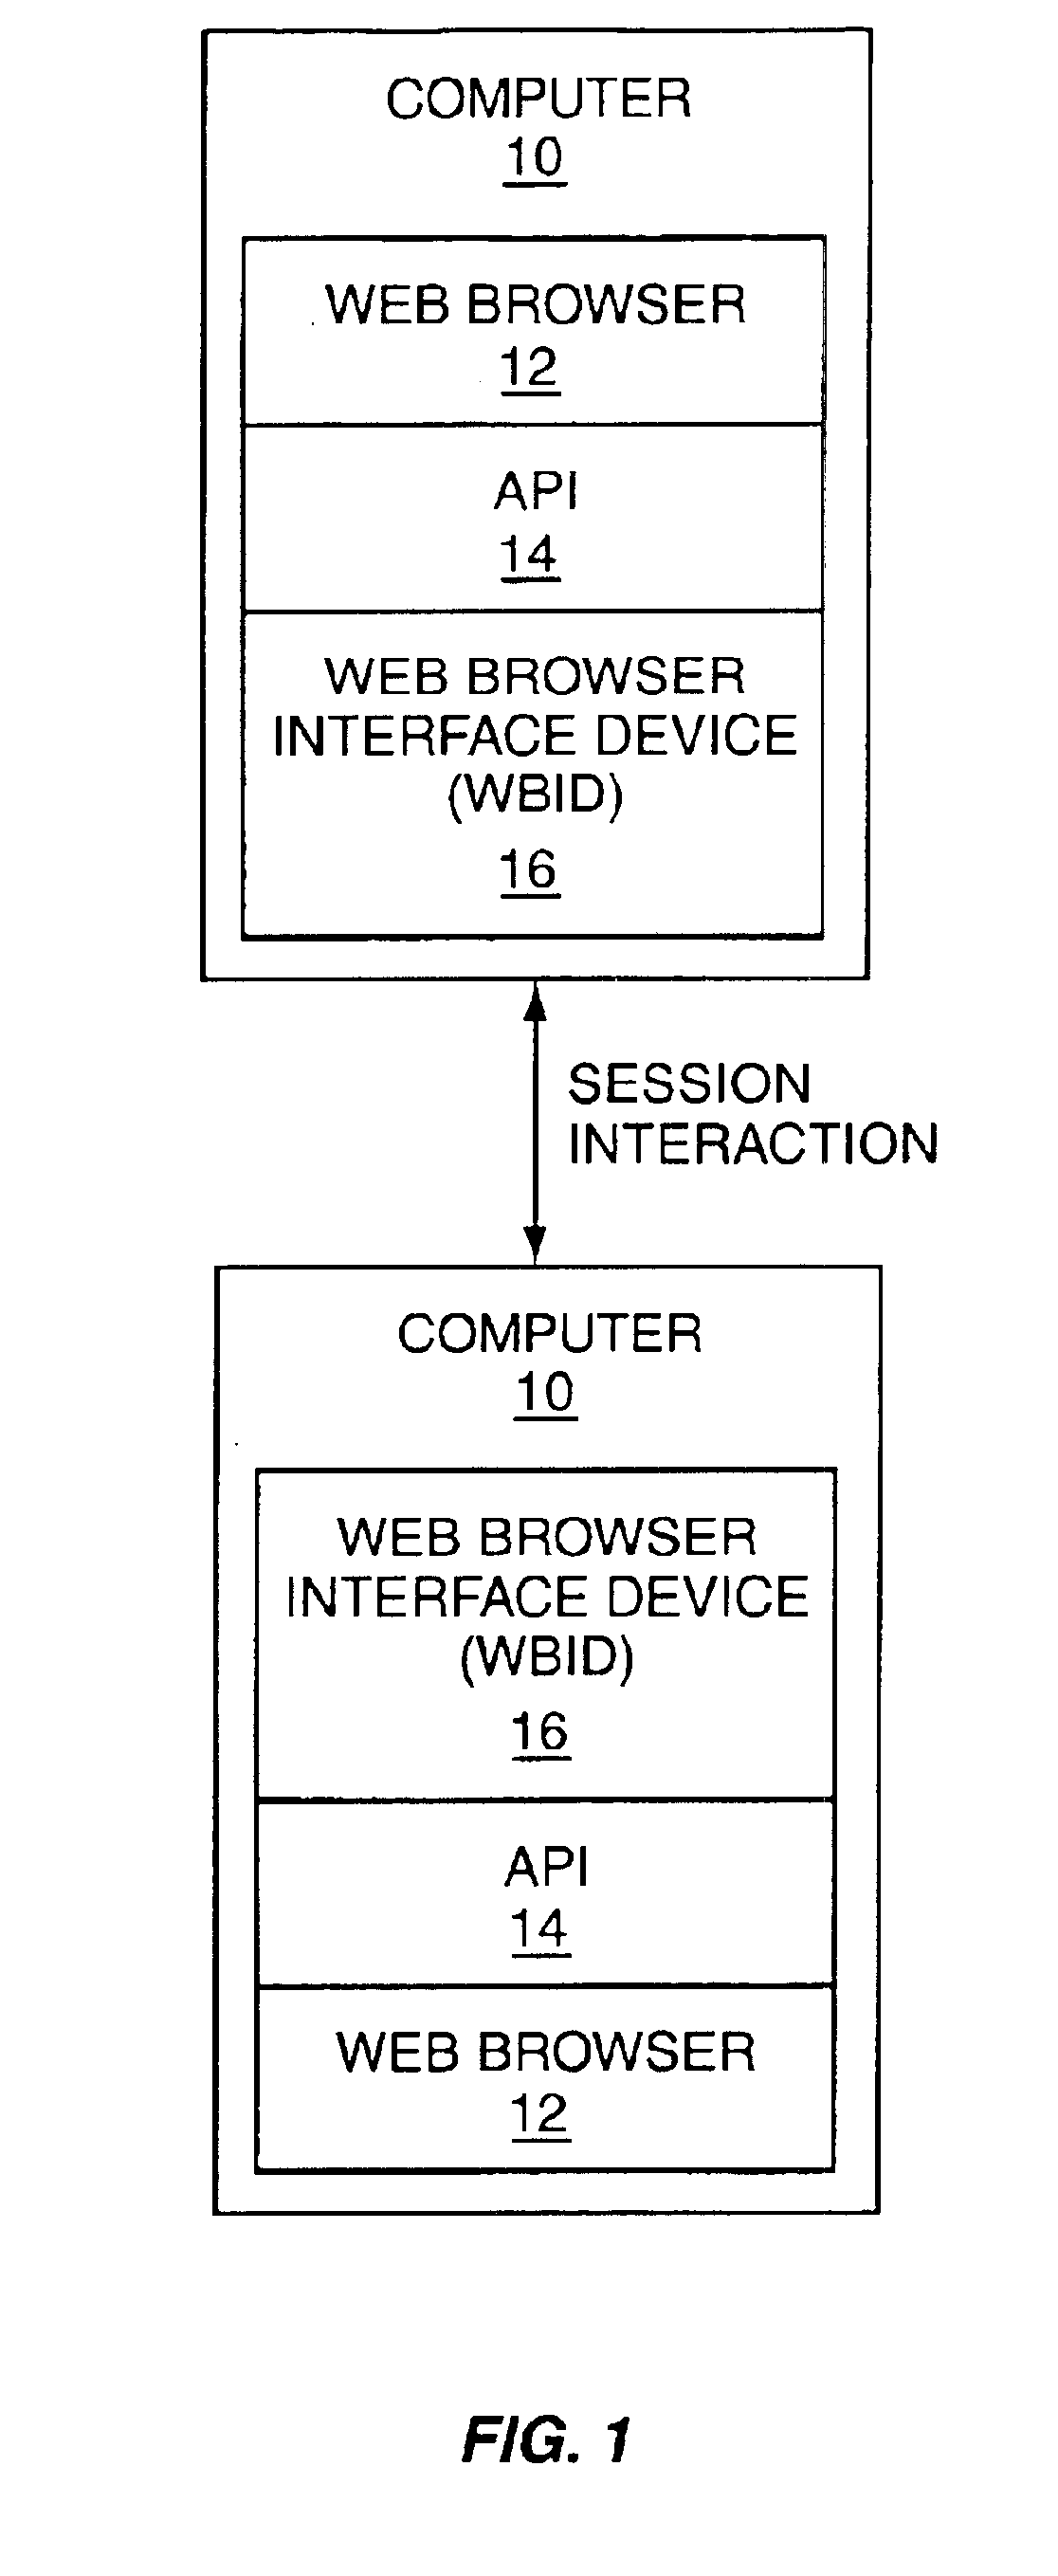 Automated web browser synchronization by using session initiation protocol during a real-time session